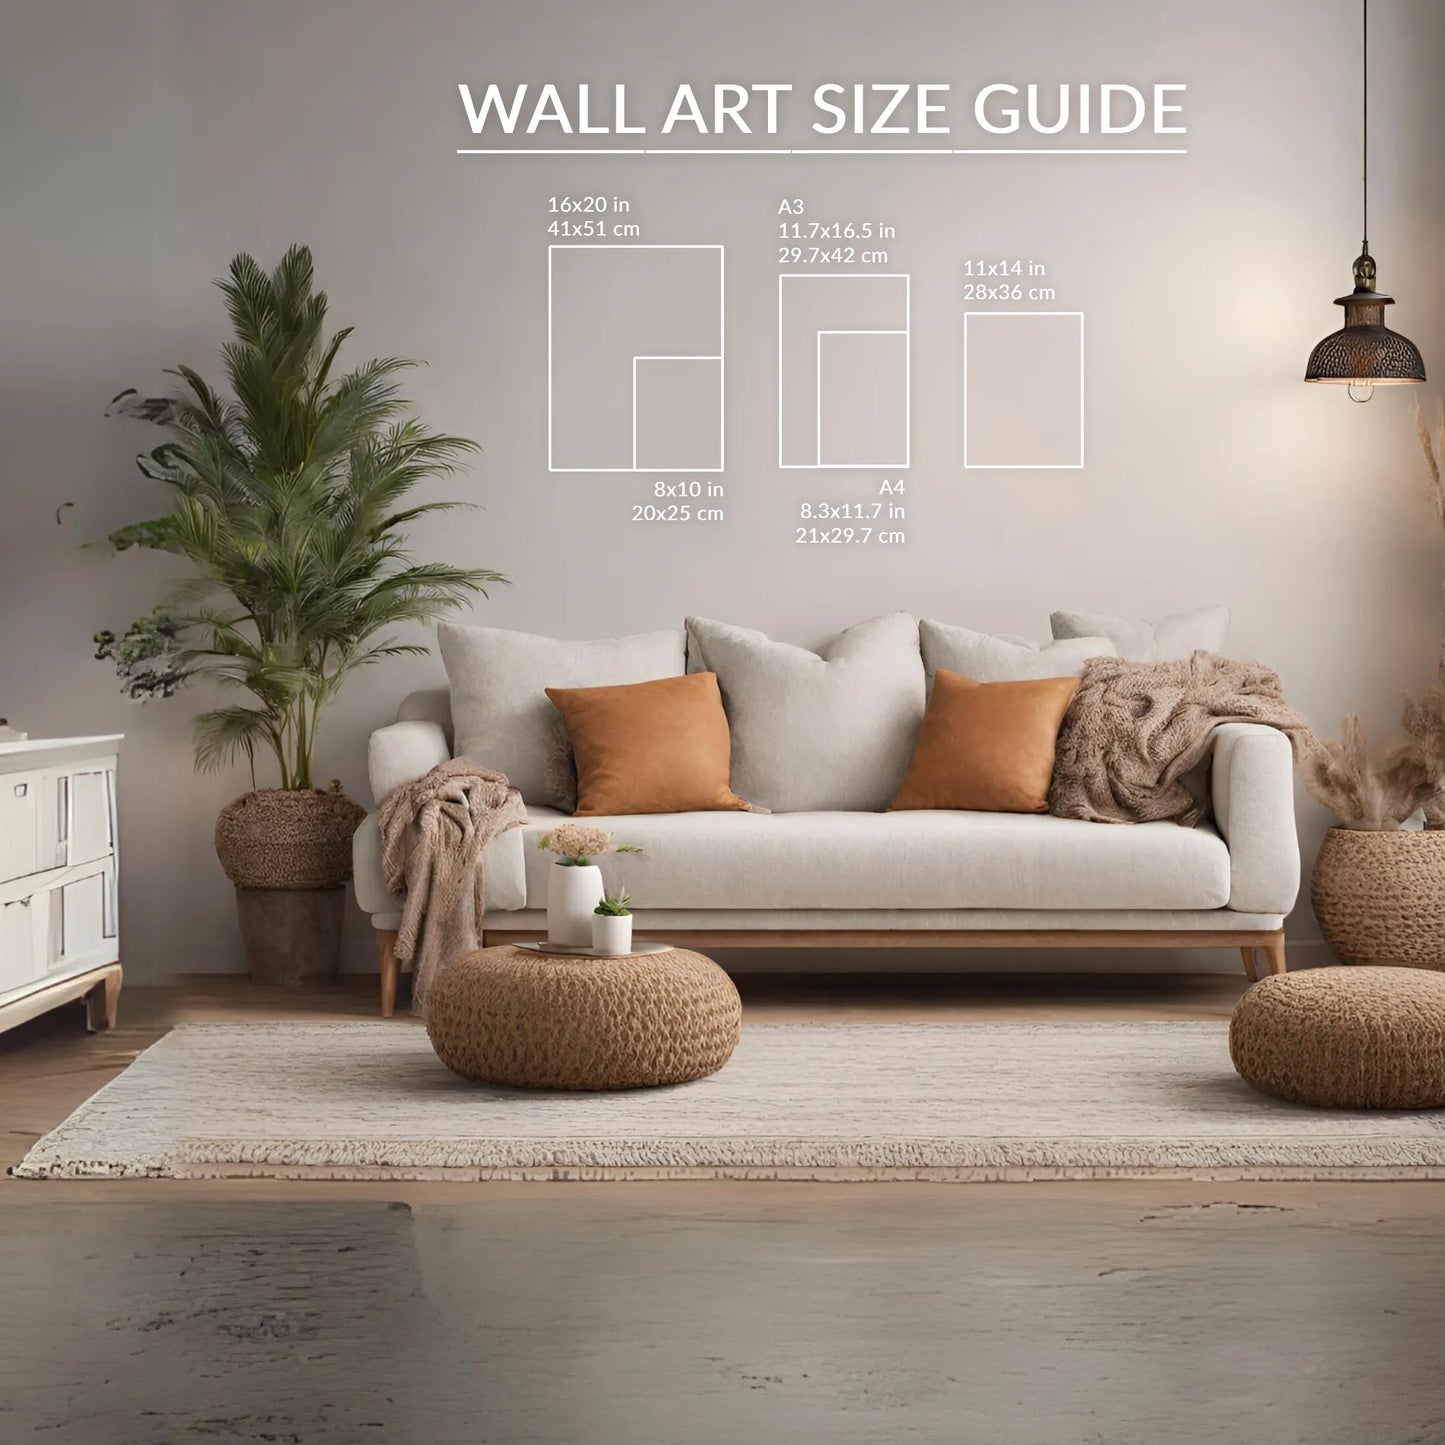 Template Wall Art Size Guide